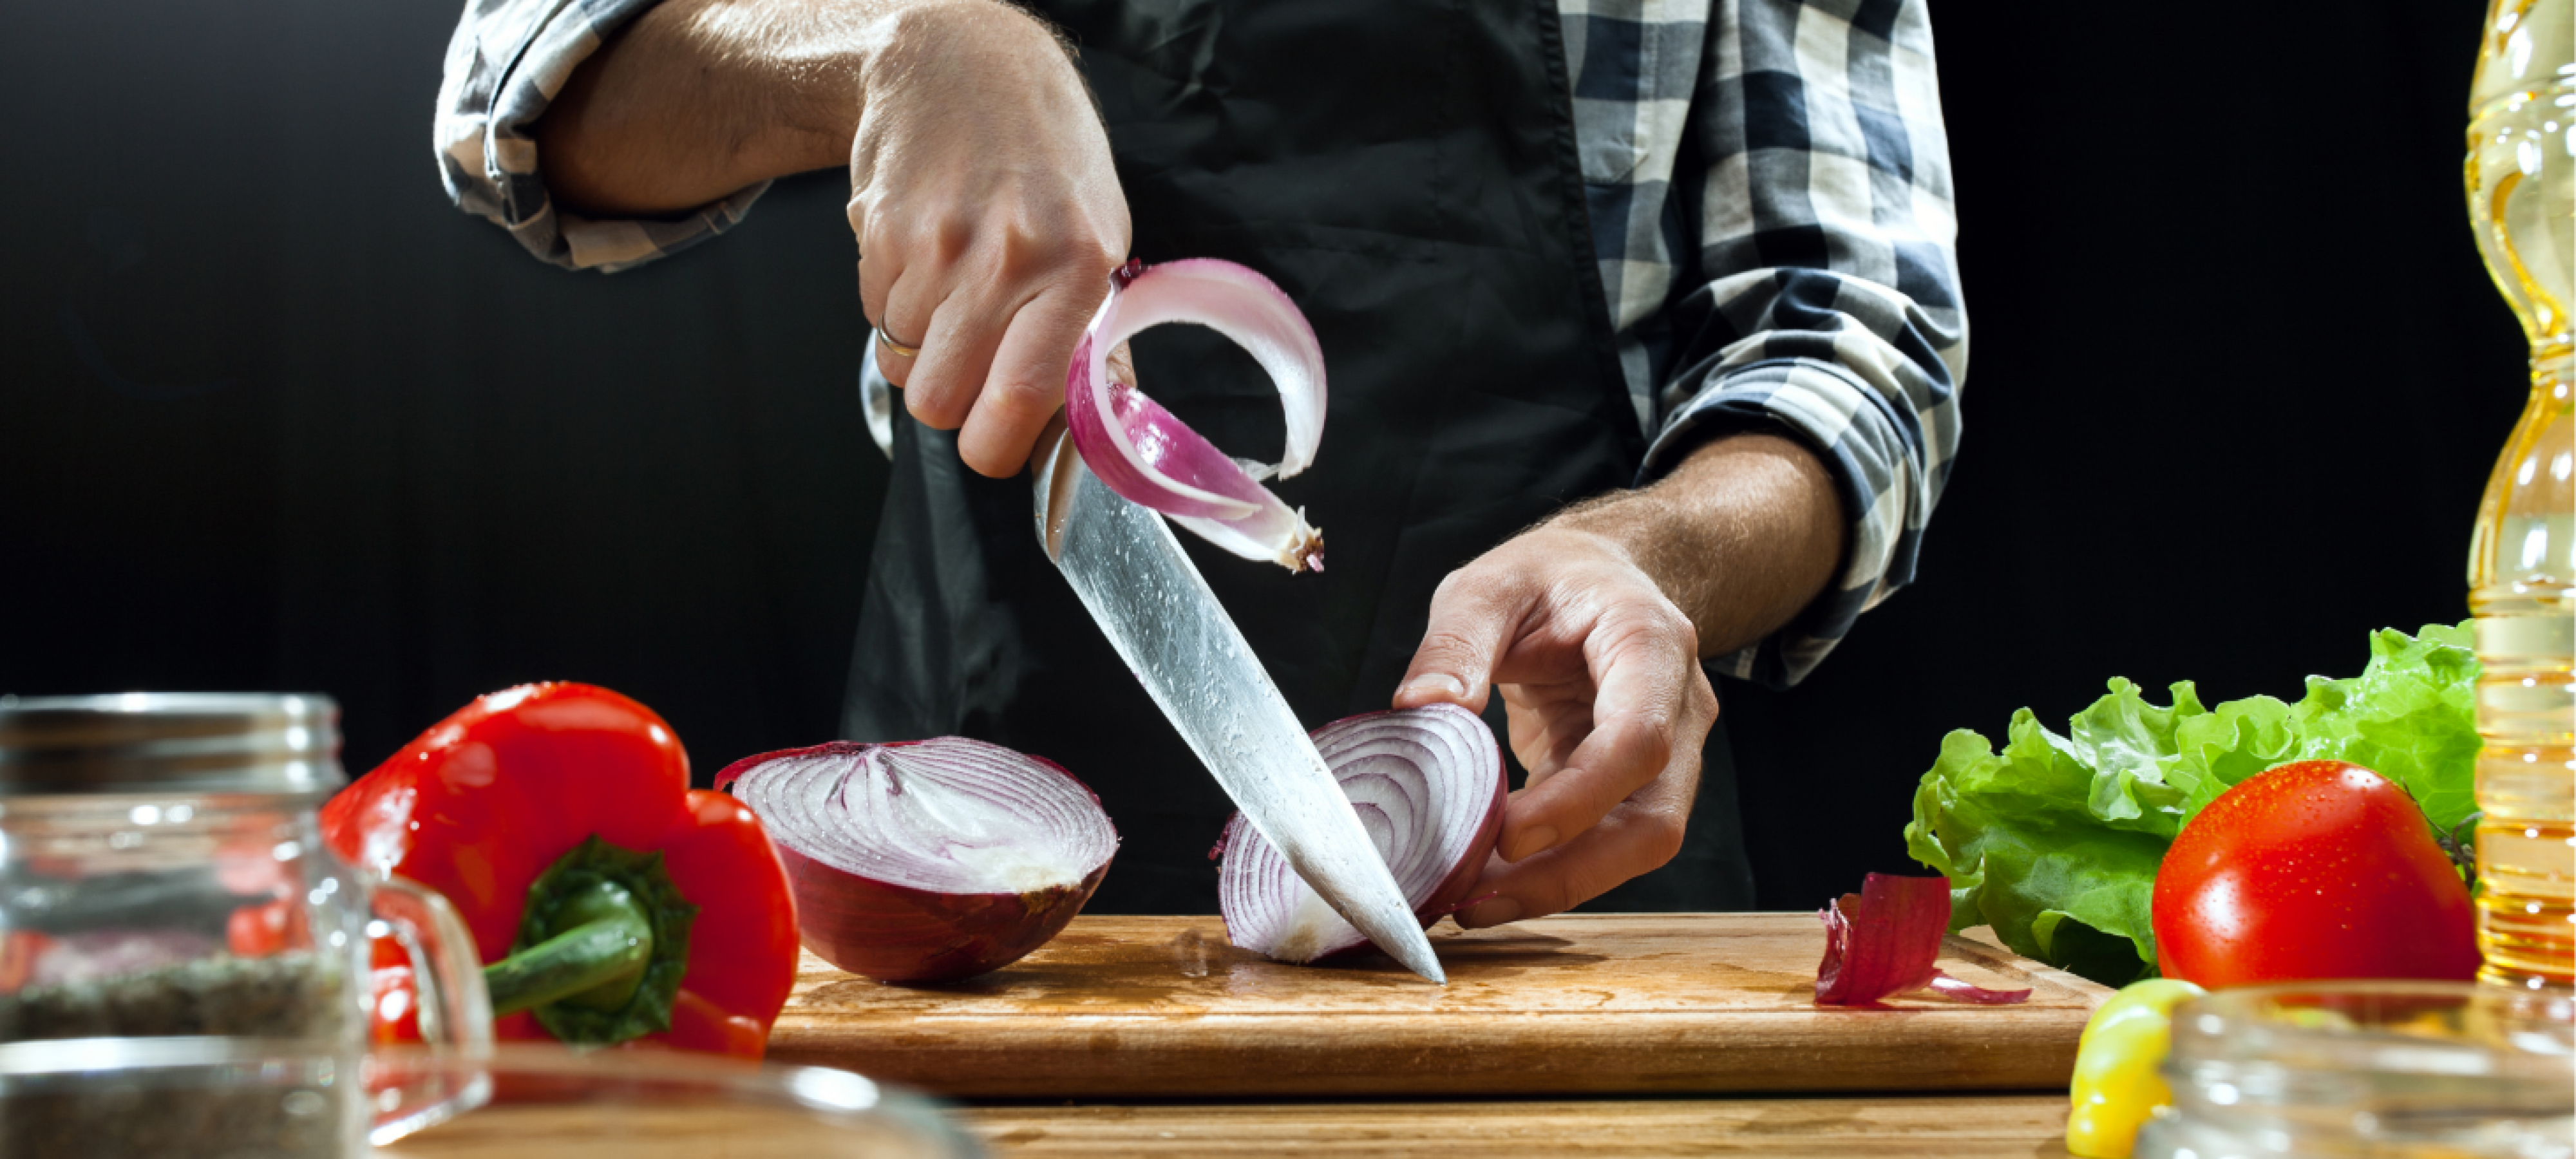 Top Reviewed Knives for Chopping Onion